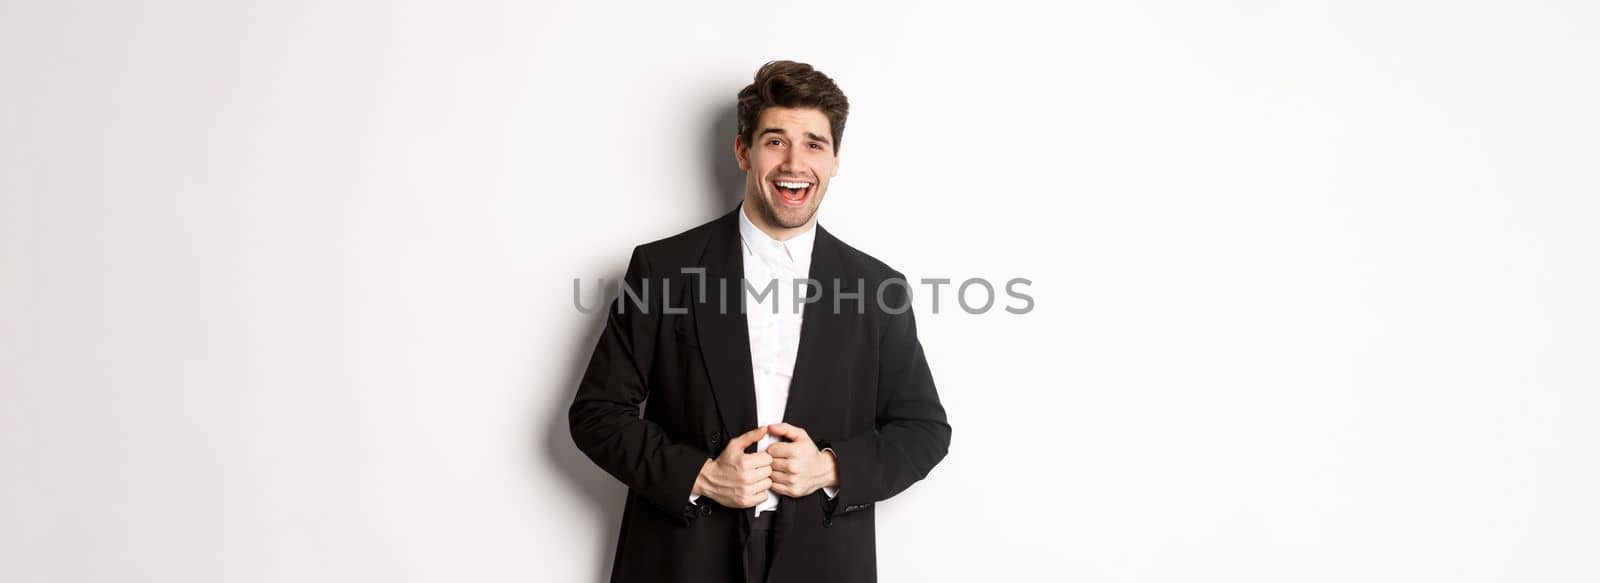 Concept of new year party, celebration and lifestyle. Portrait of handsome and confident man in suit, smiling pleased, feeling successful, standing over white background.